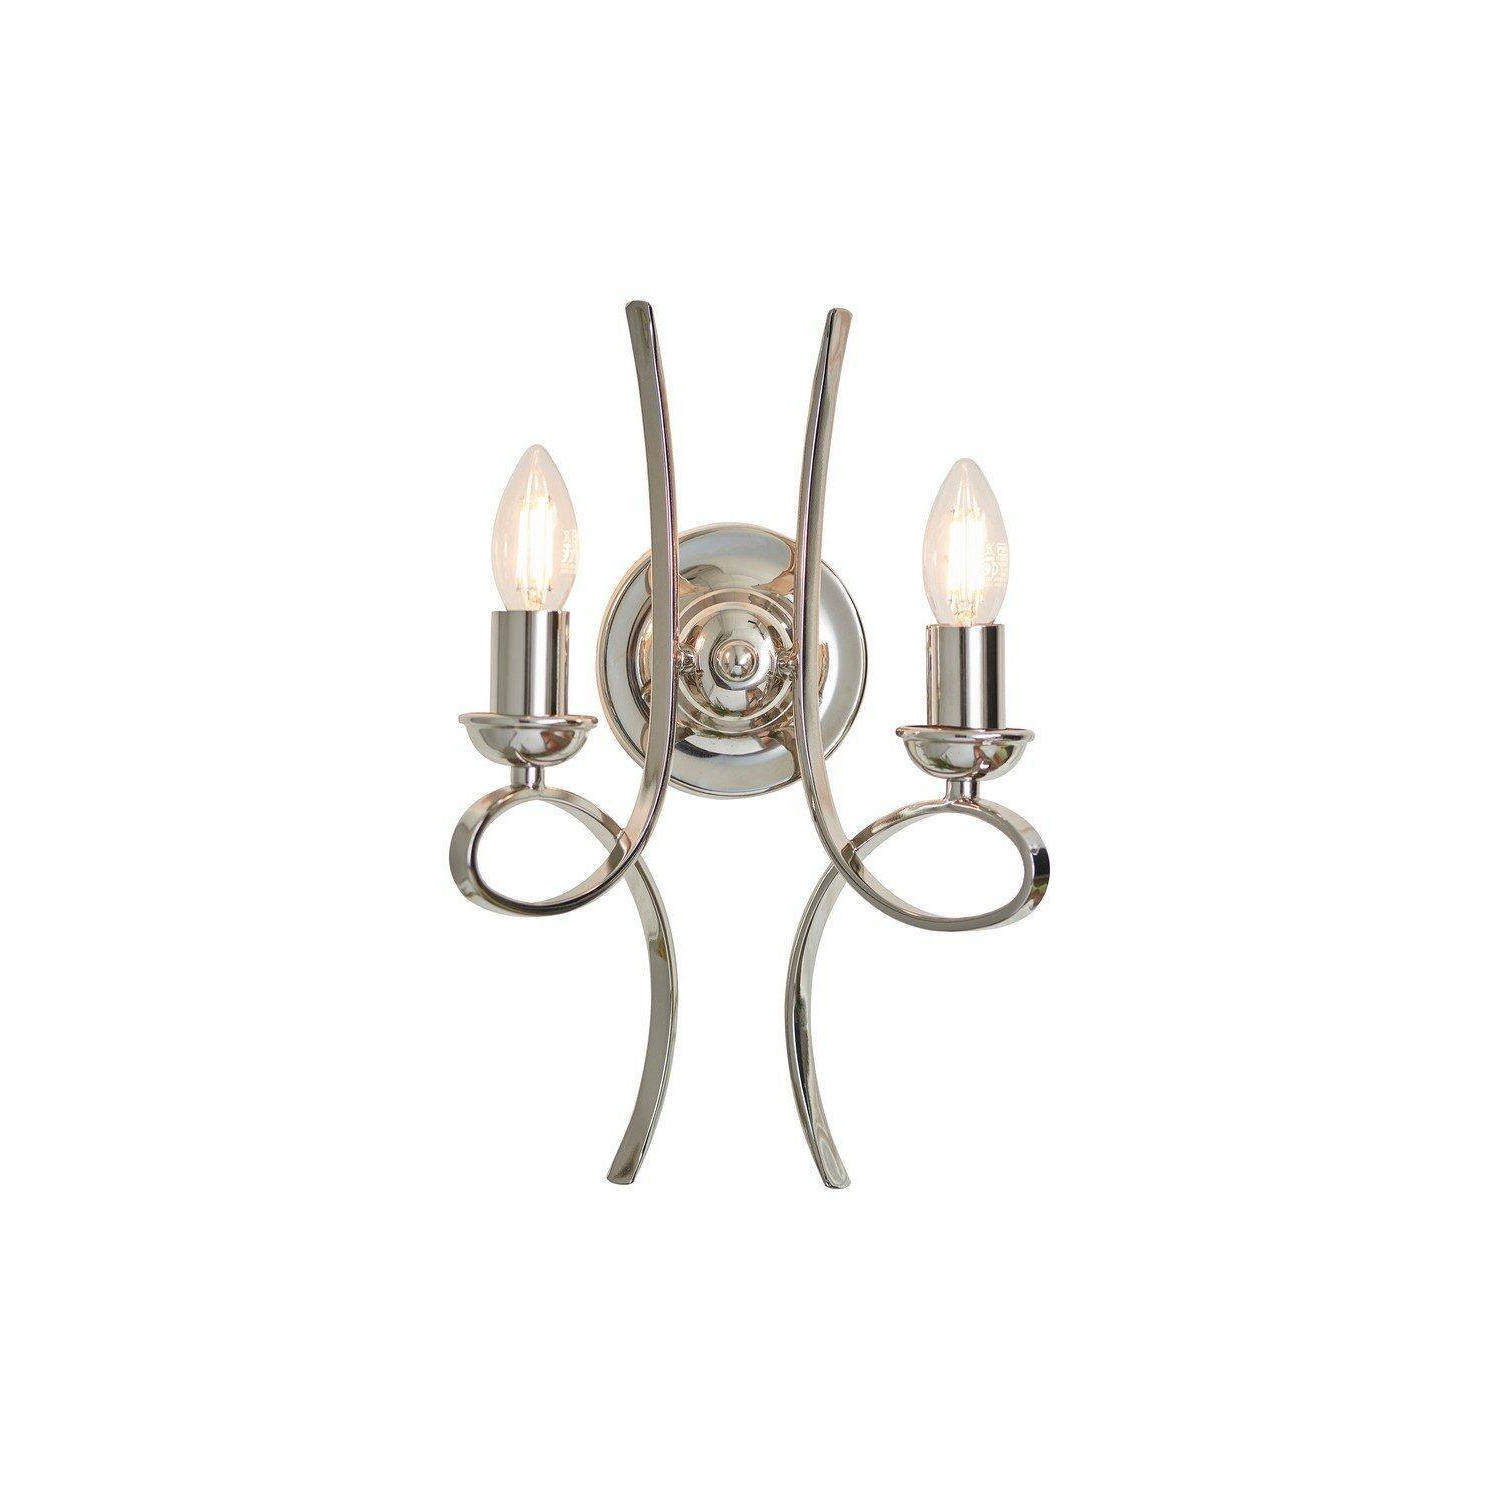 Penn 2 Light Indoor Twin Candle Wall Light Polished Nickel Plate E14 - image 1